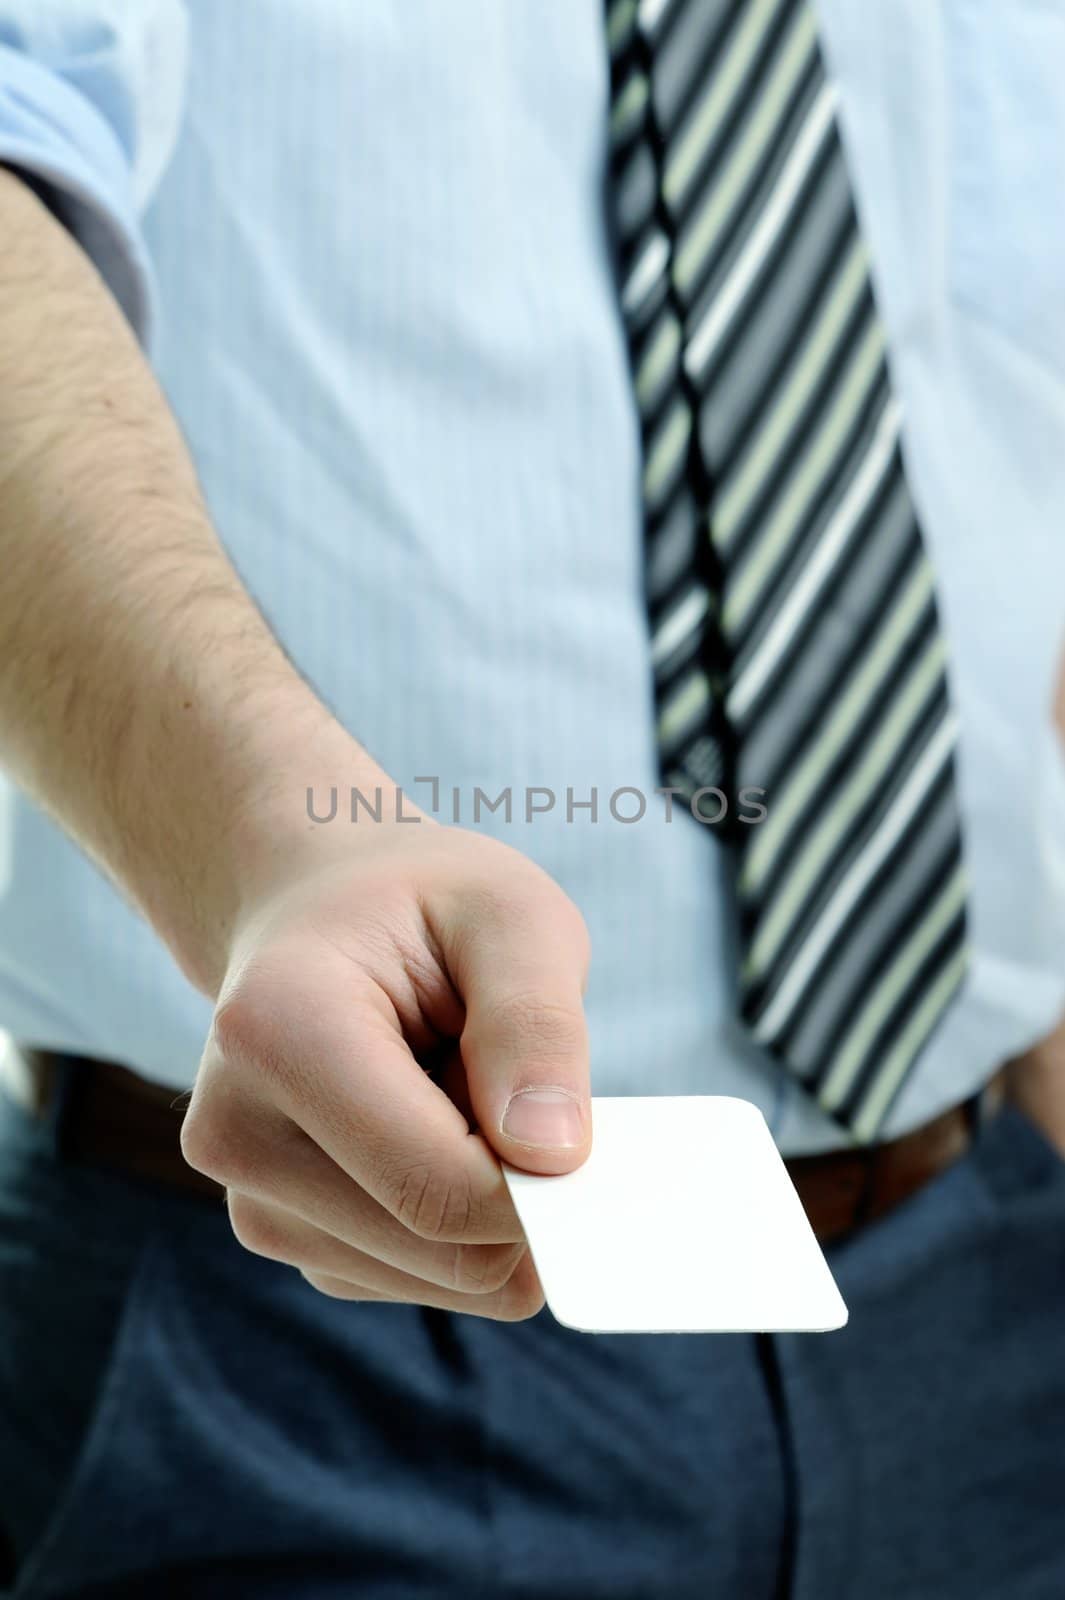 An image of businessman holding business card